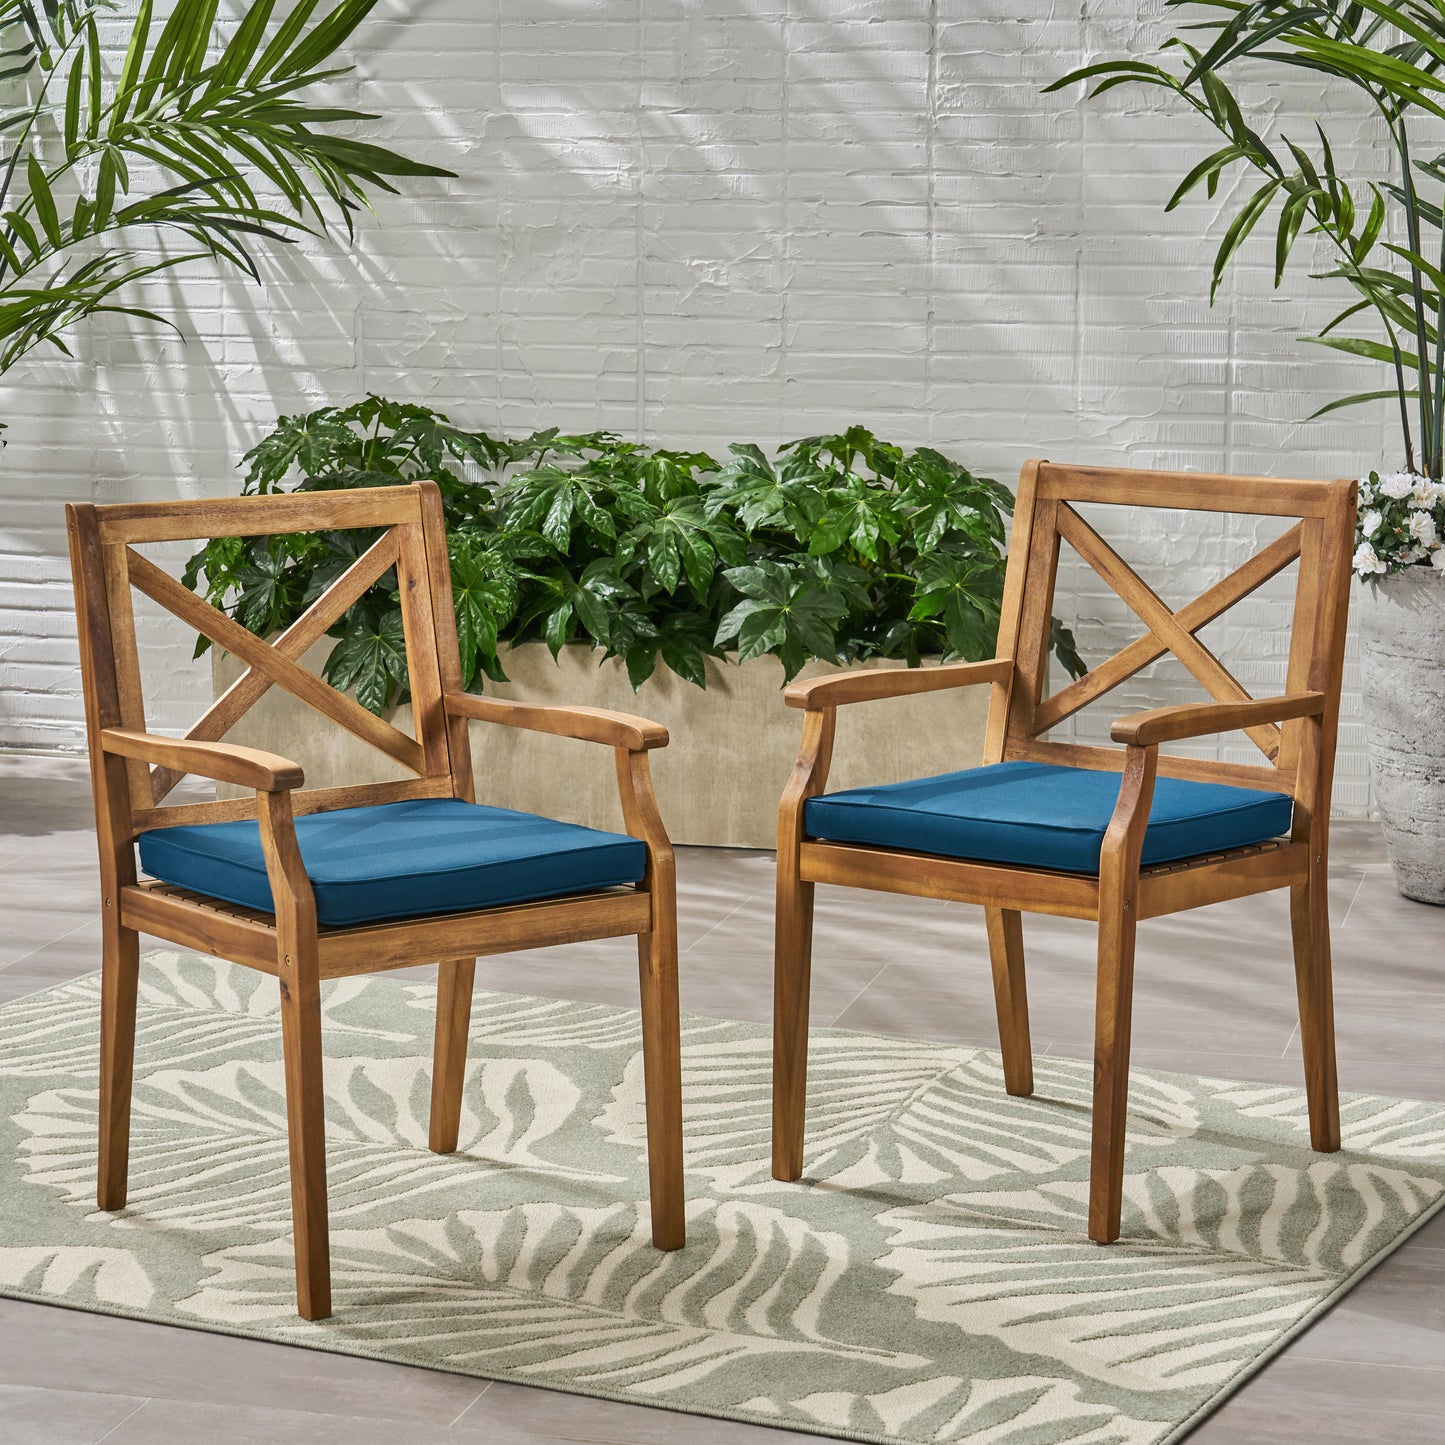 Peter Outdoor Acacia Wood Dining Chair (Set of 2